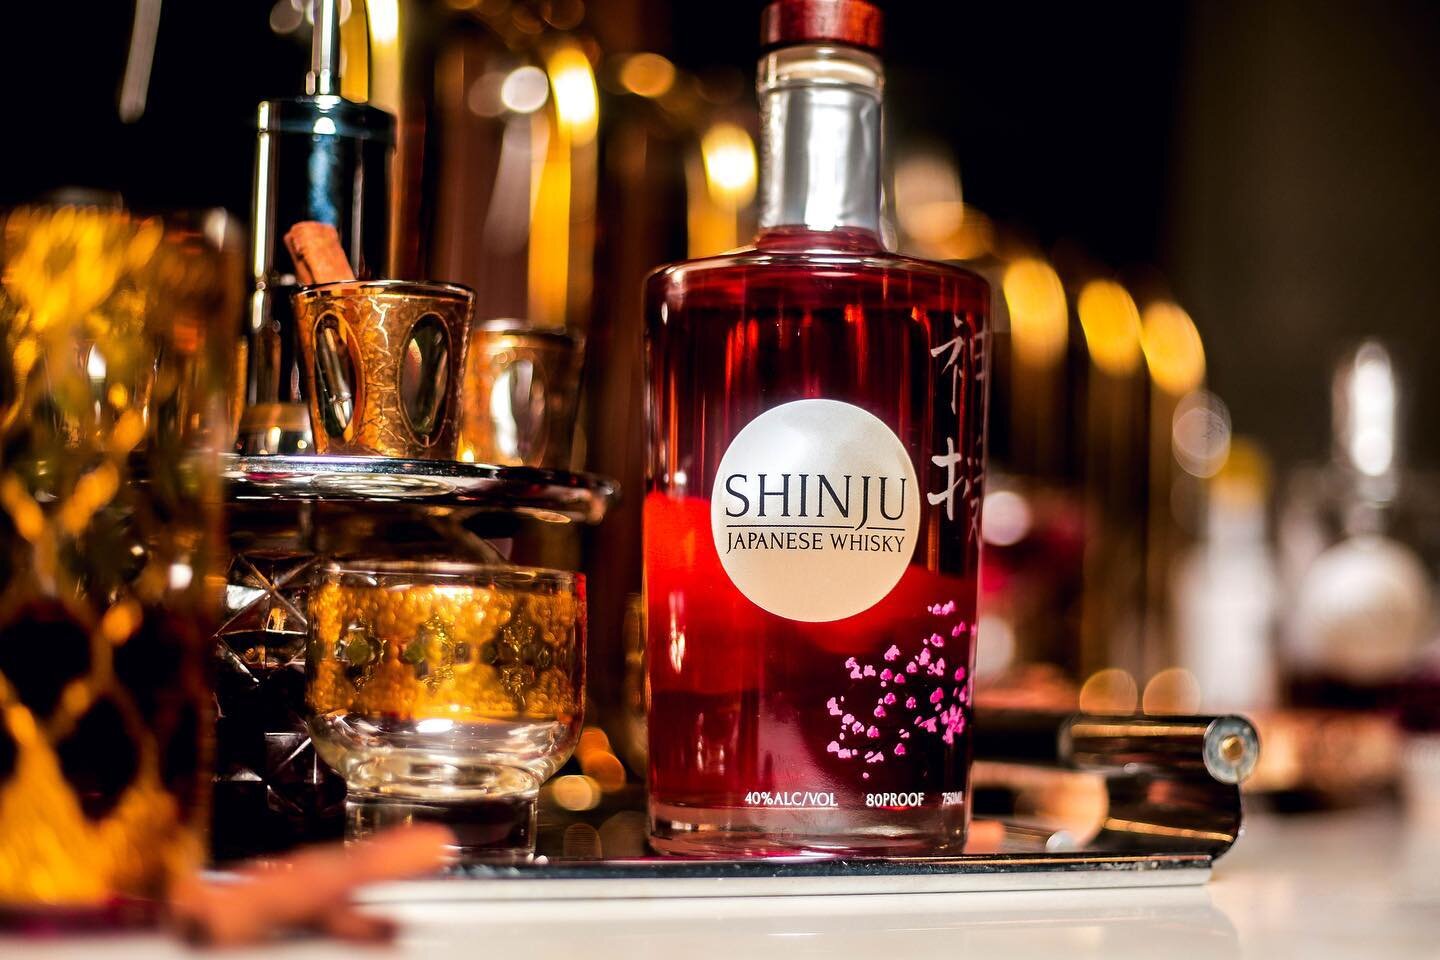 Happy #nationalcocktailday from our &ldquo;double distilled, well balanced elegant expression with wafts of honey, orange and vanilla accompanied by hints of herbaceous notes and light oak,&rdquo; as said by @oakbeveragesinc. 

Pickup a bottle of Shi